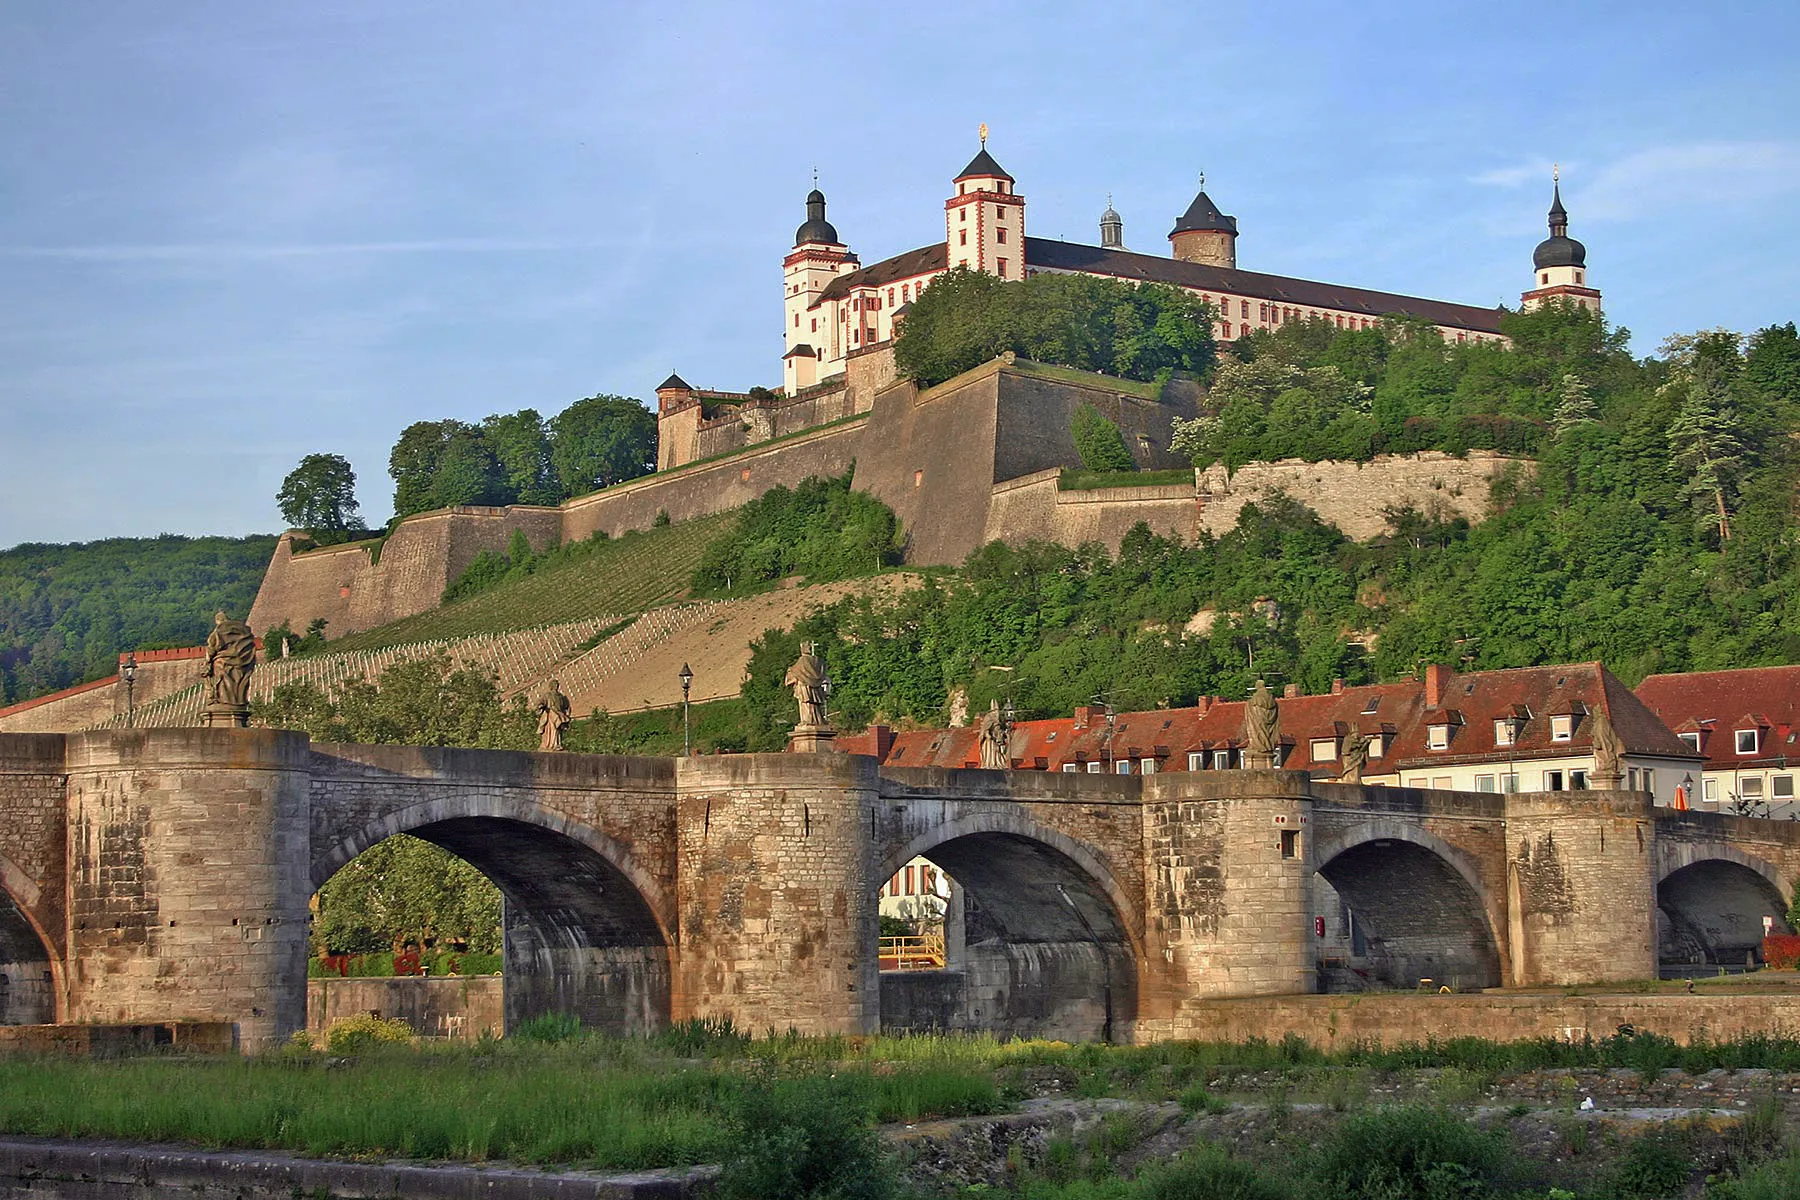 Photo showing: Fortress Marienberg is a prominent landmark on the Main river in Würzburg, Germany